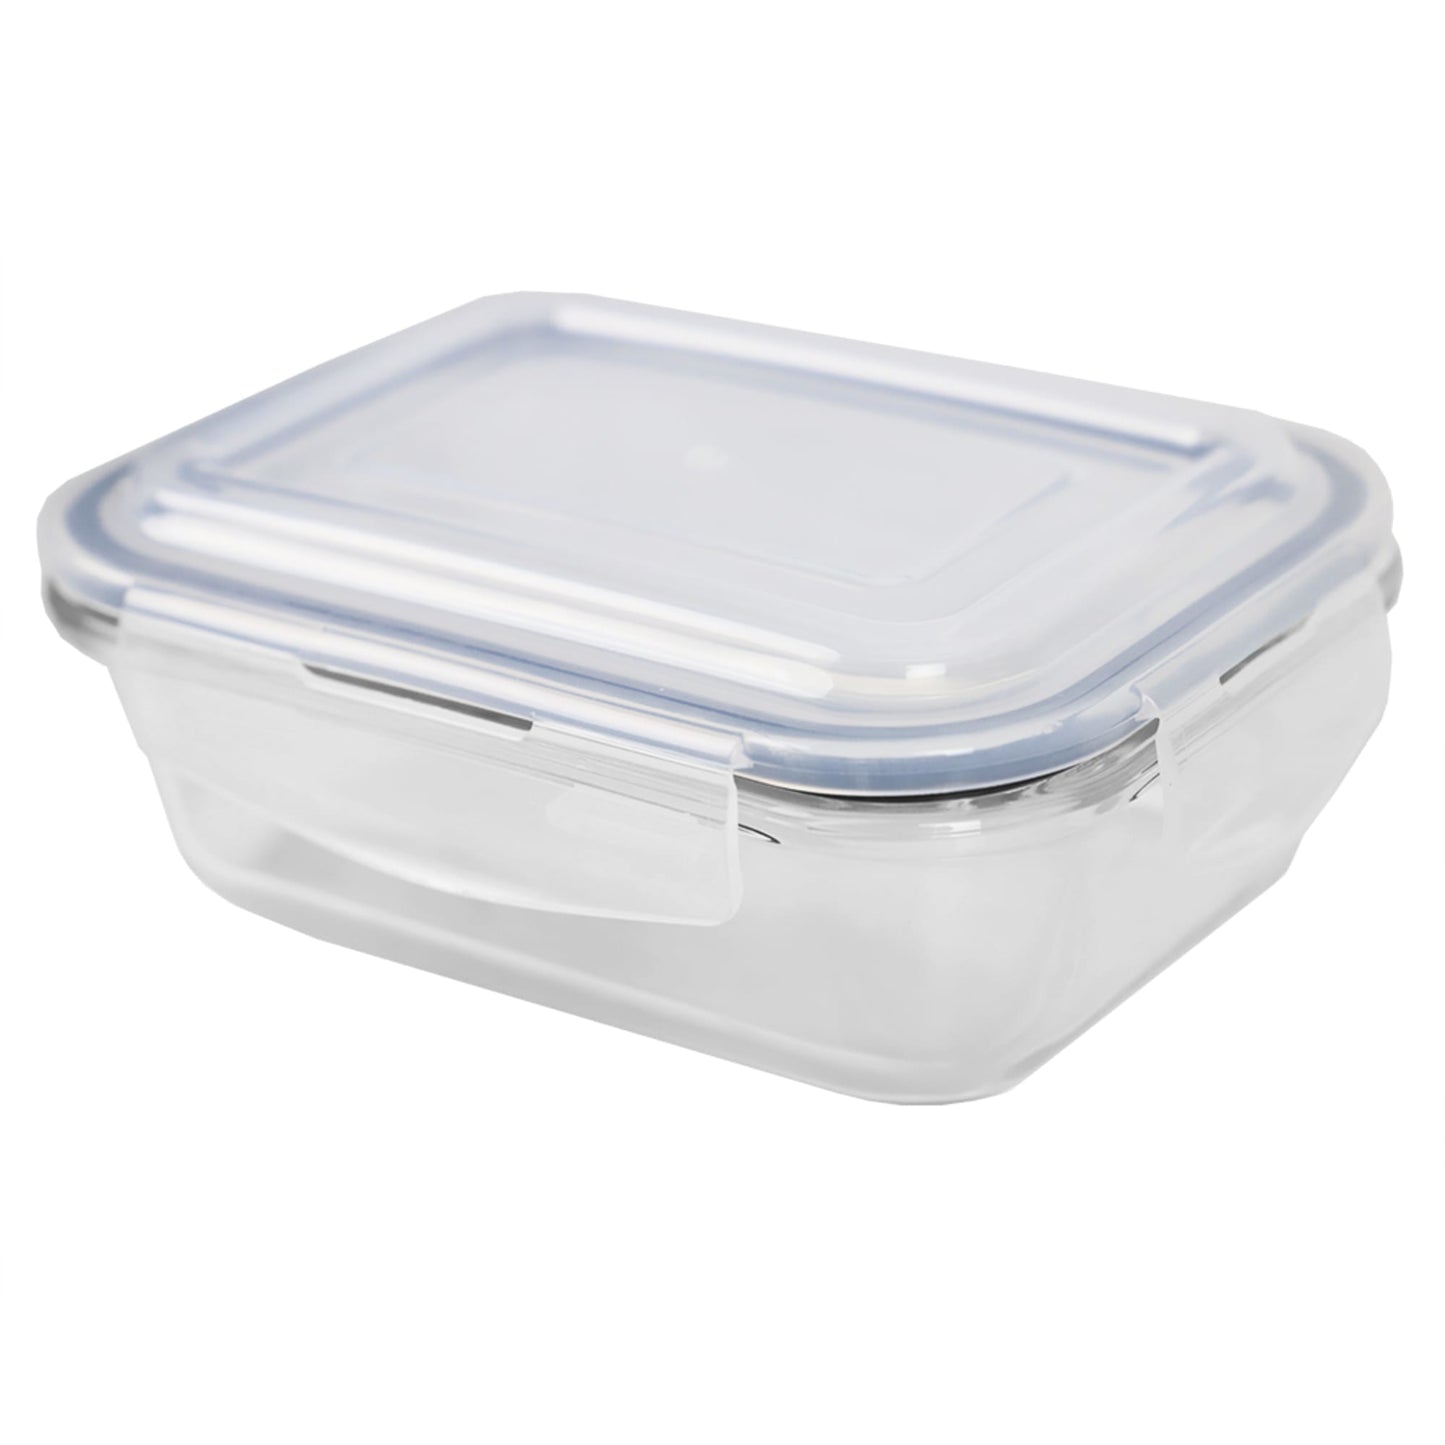 Michael Graves Design 21 Ounce High Borosilicate Glass Rectangle Food Storage Container with Indigo Rubber Seal